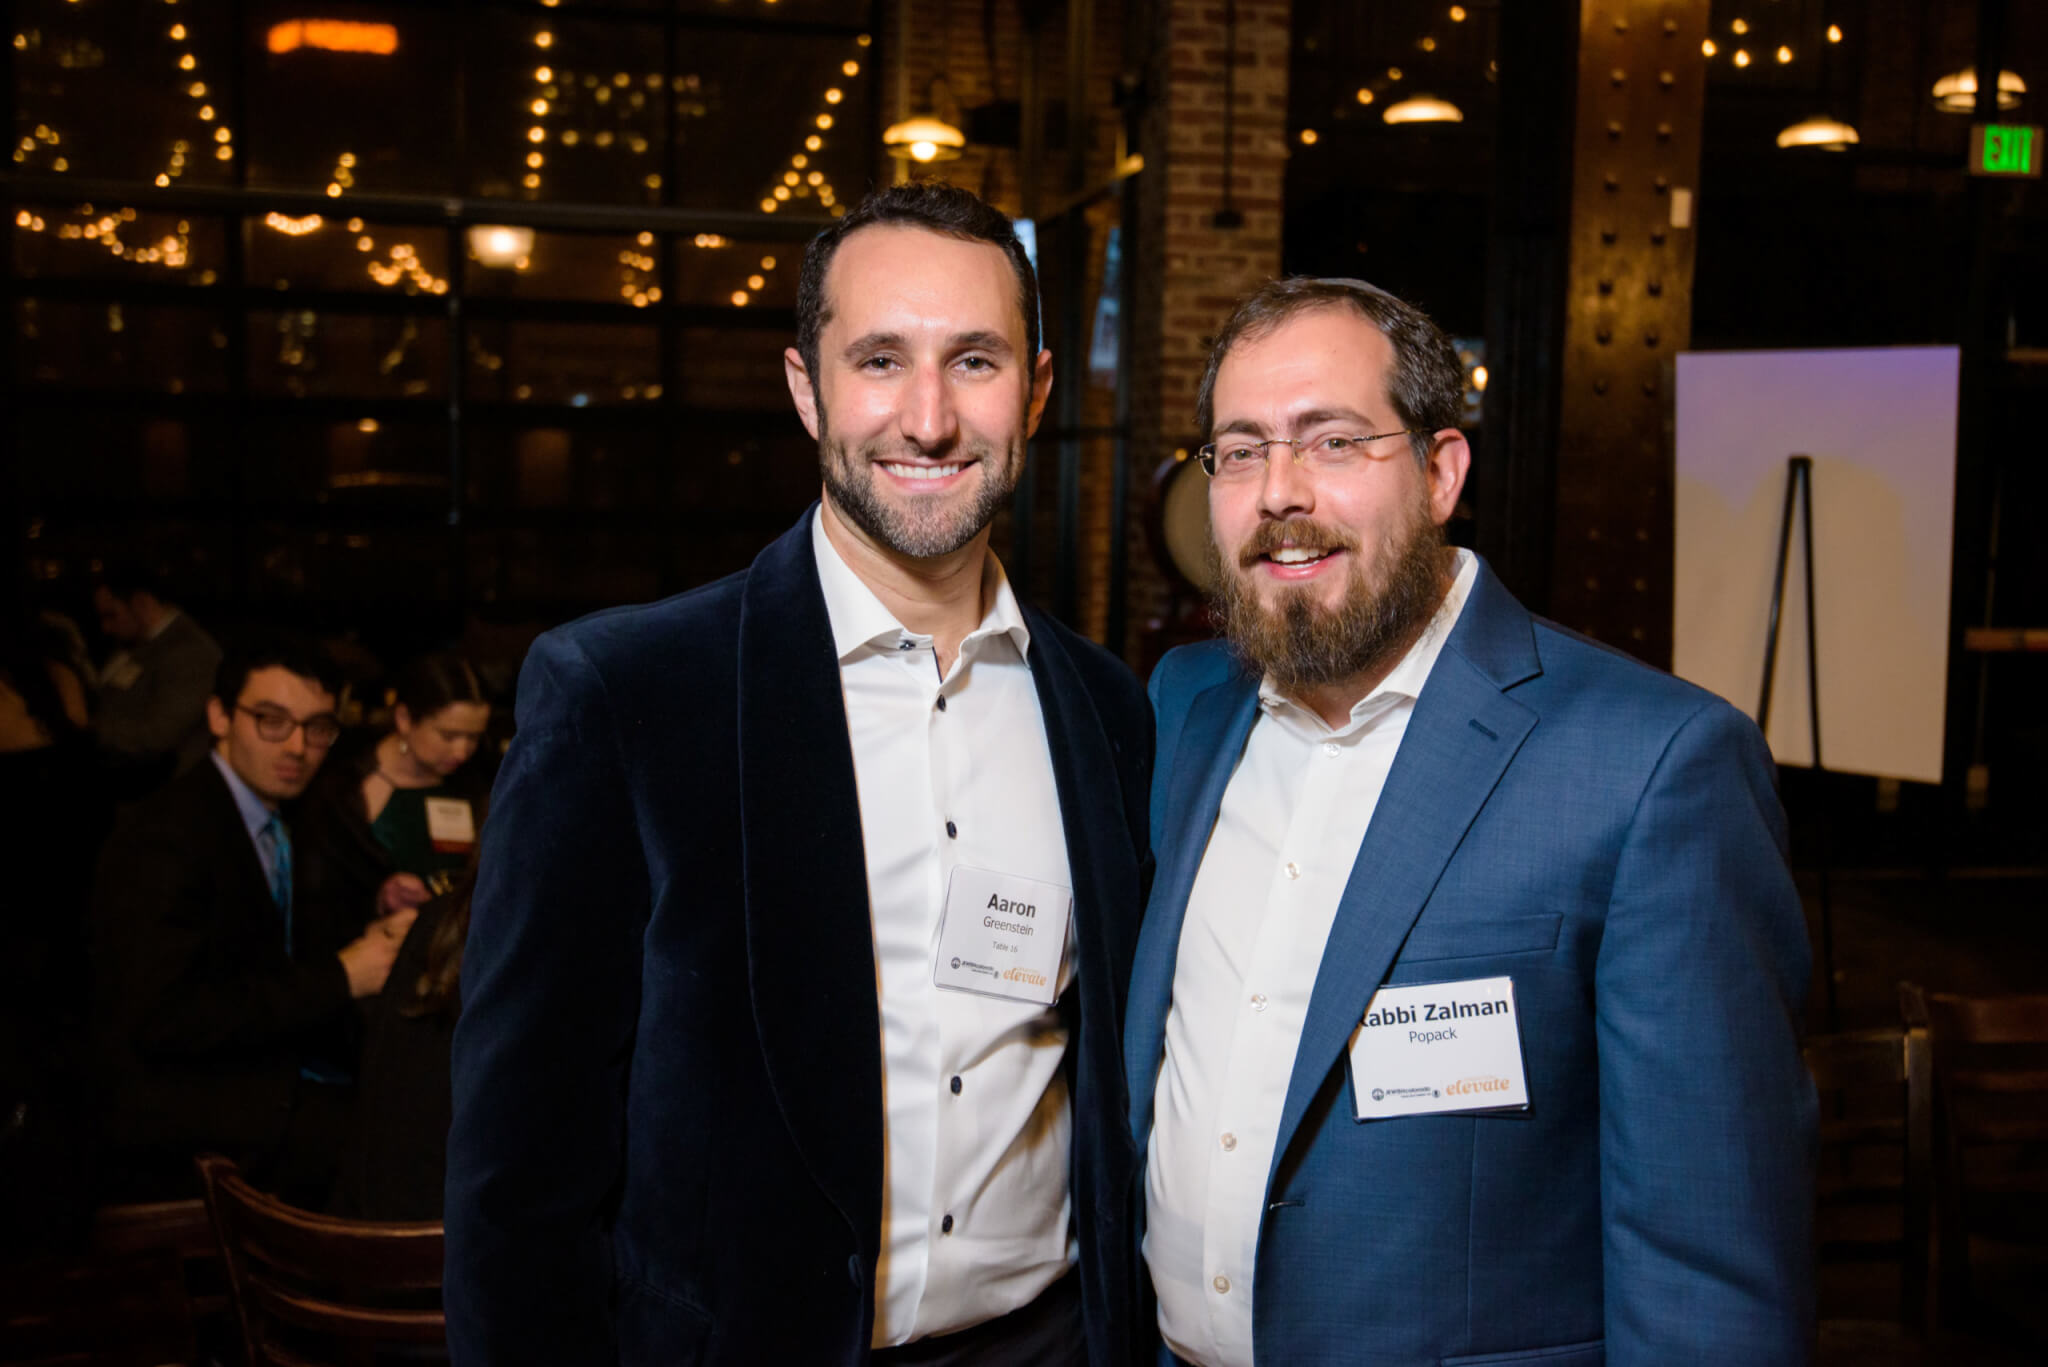 JEWISHcolorado's Young Adult Division's (YAD) Operation ELEVATE 2022